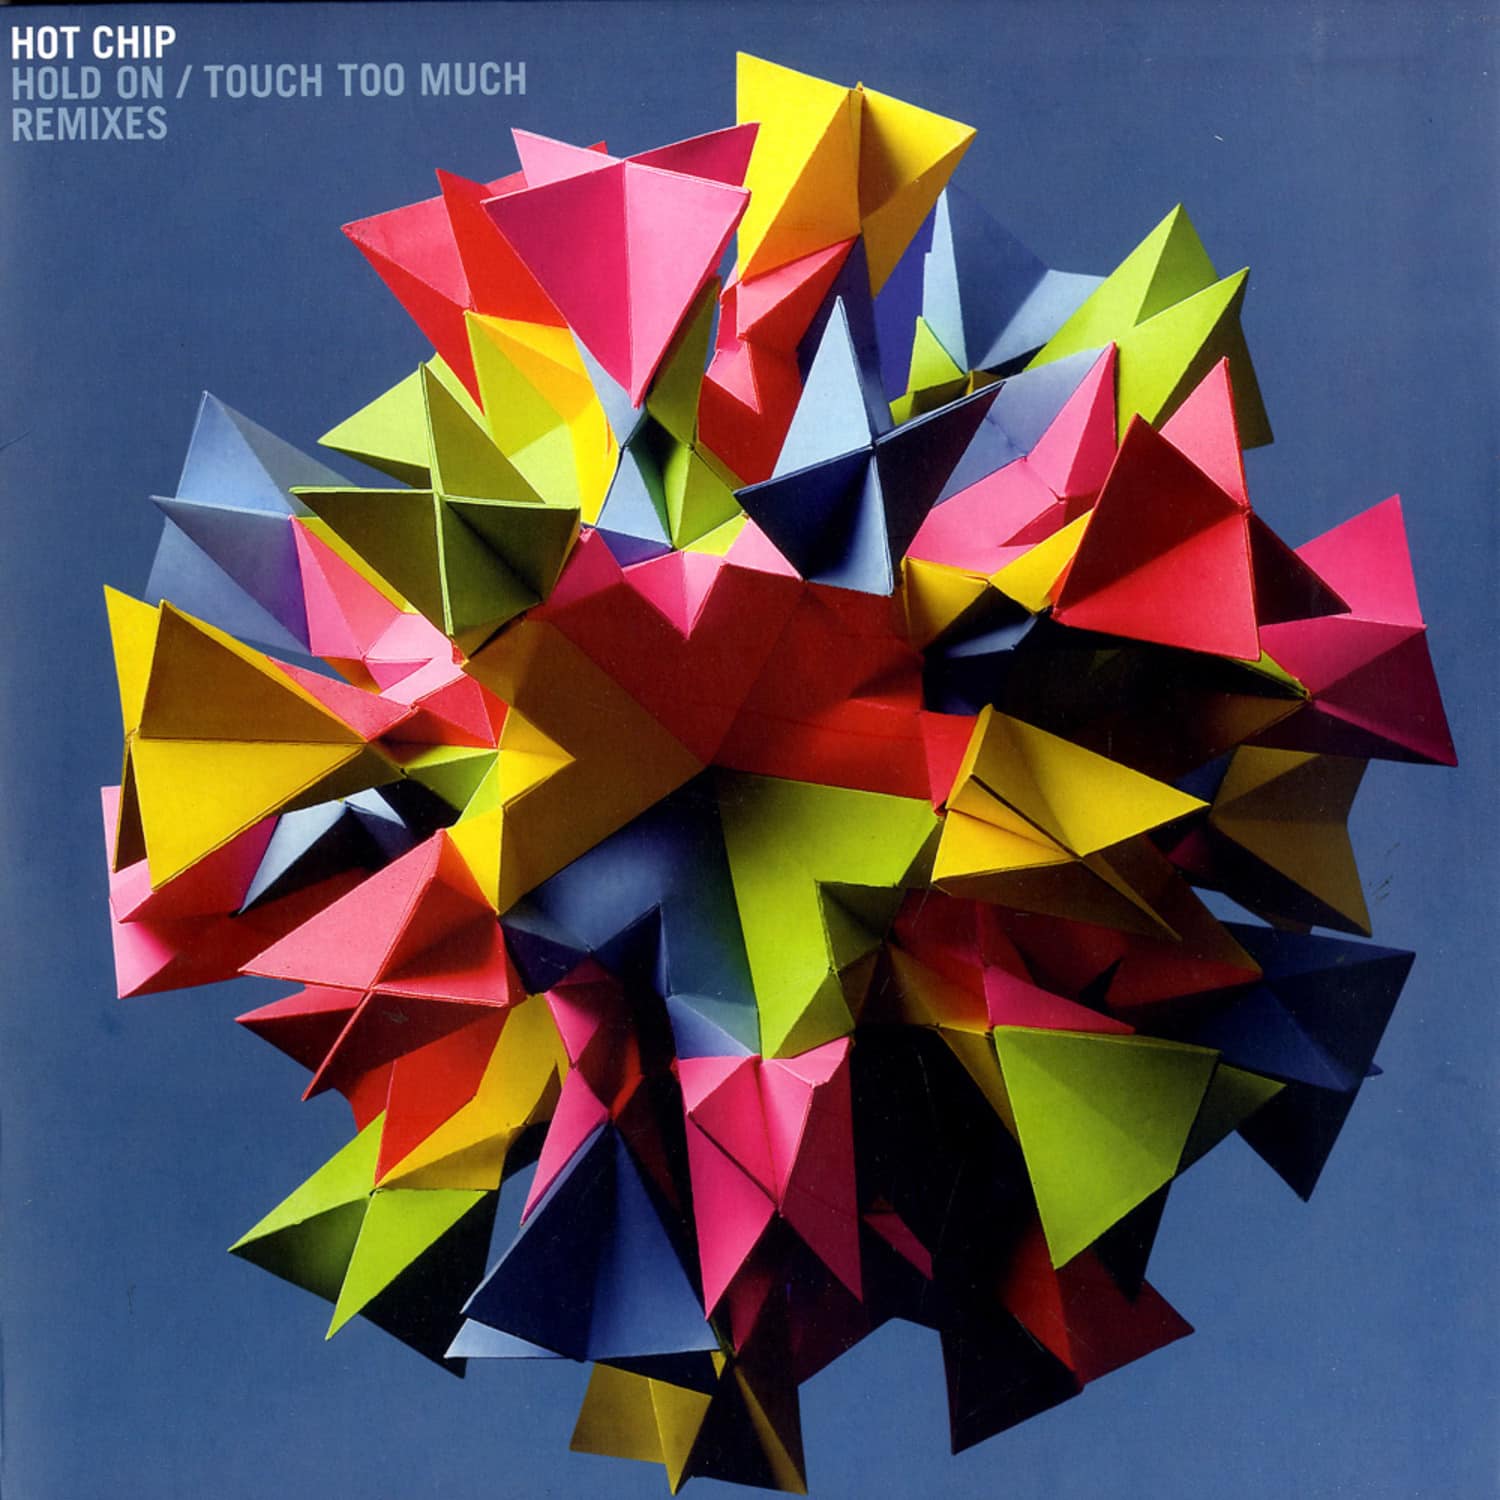 Hot Chip - HOLD ON / TOUCH TOO MUCH - EWAN PEARSON & KOLLEKTIV TURMSTRASSE REMIXES 